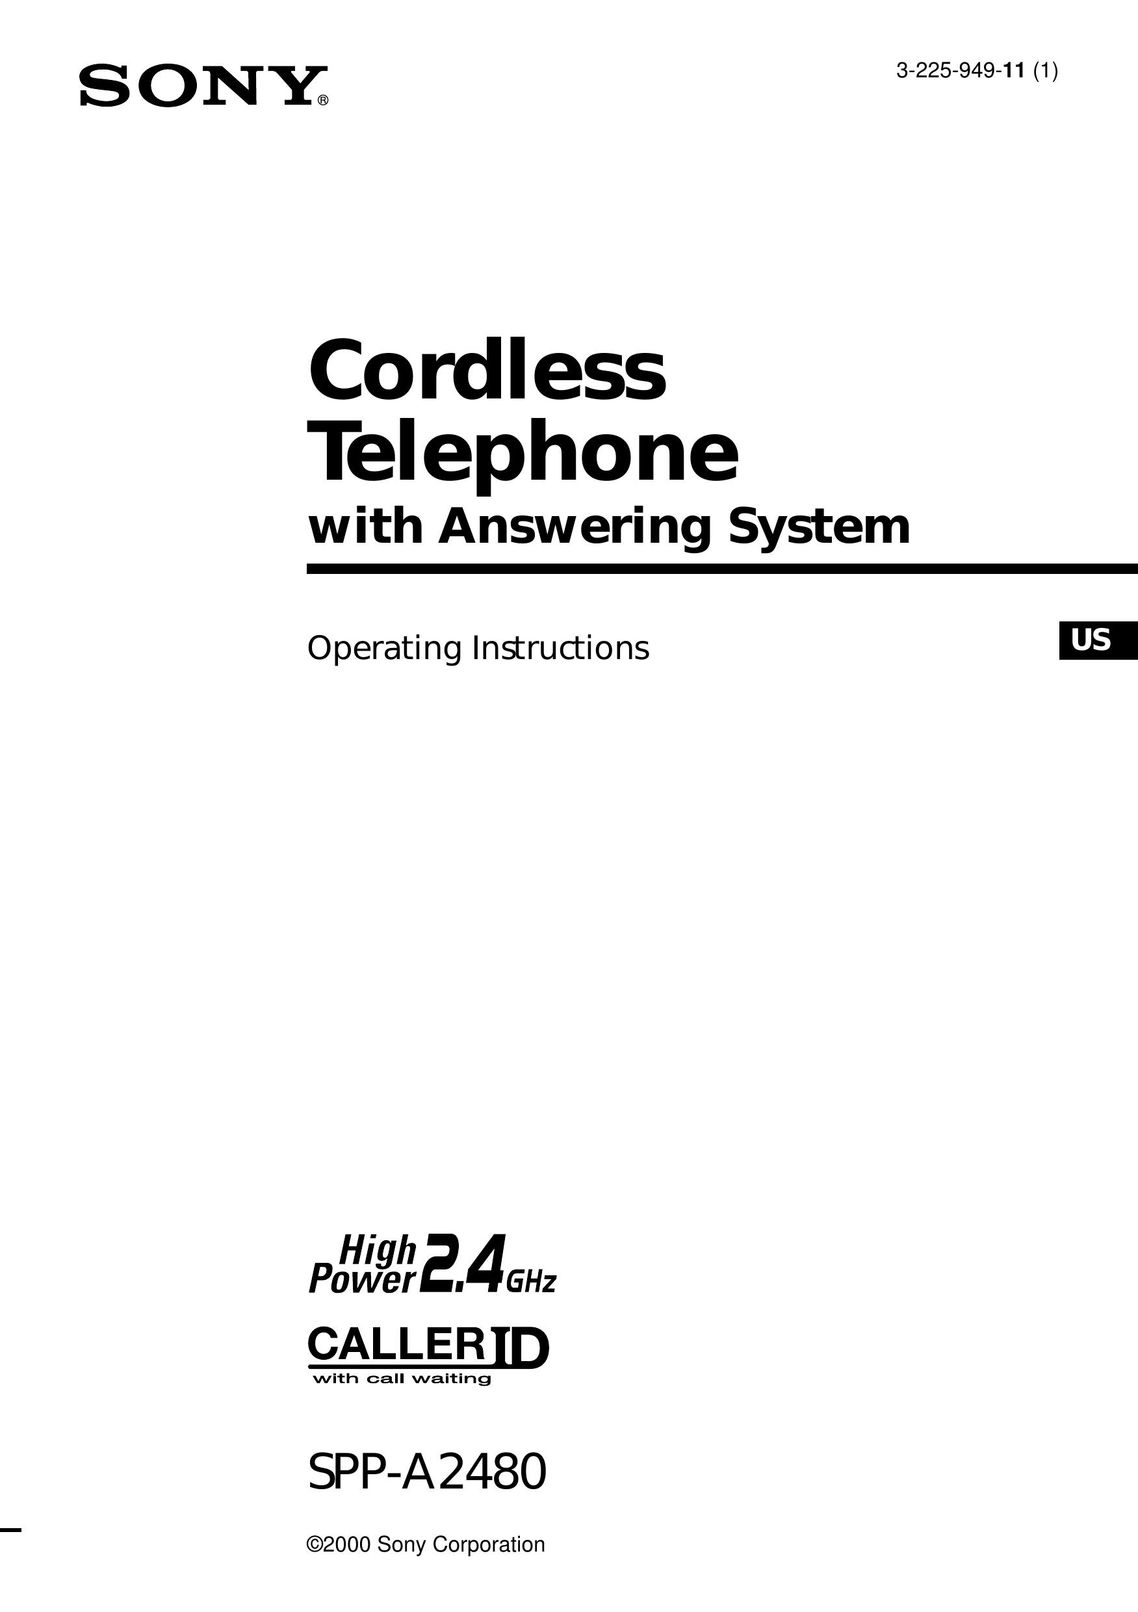 Sony SPP-A2480 Cordless Telephone User Manual